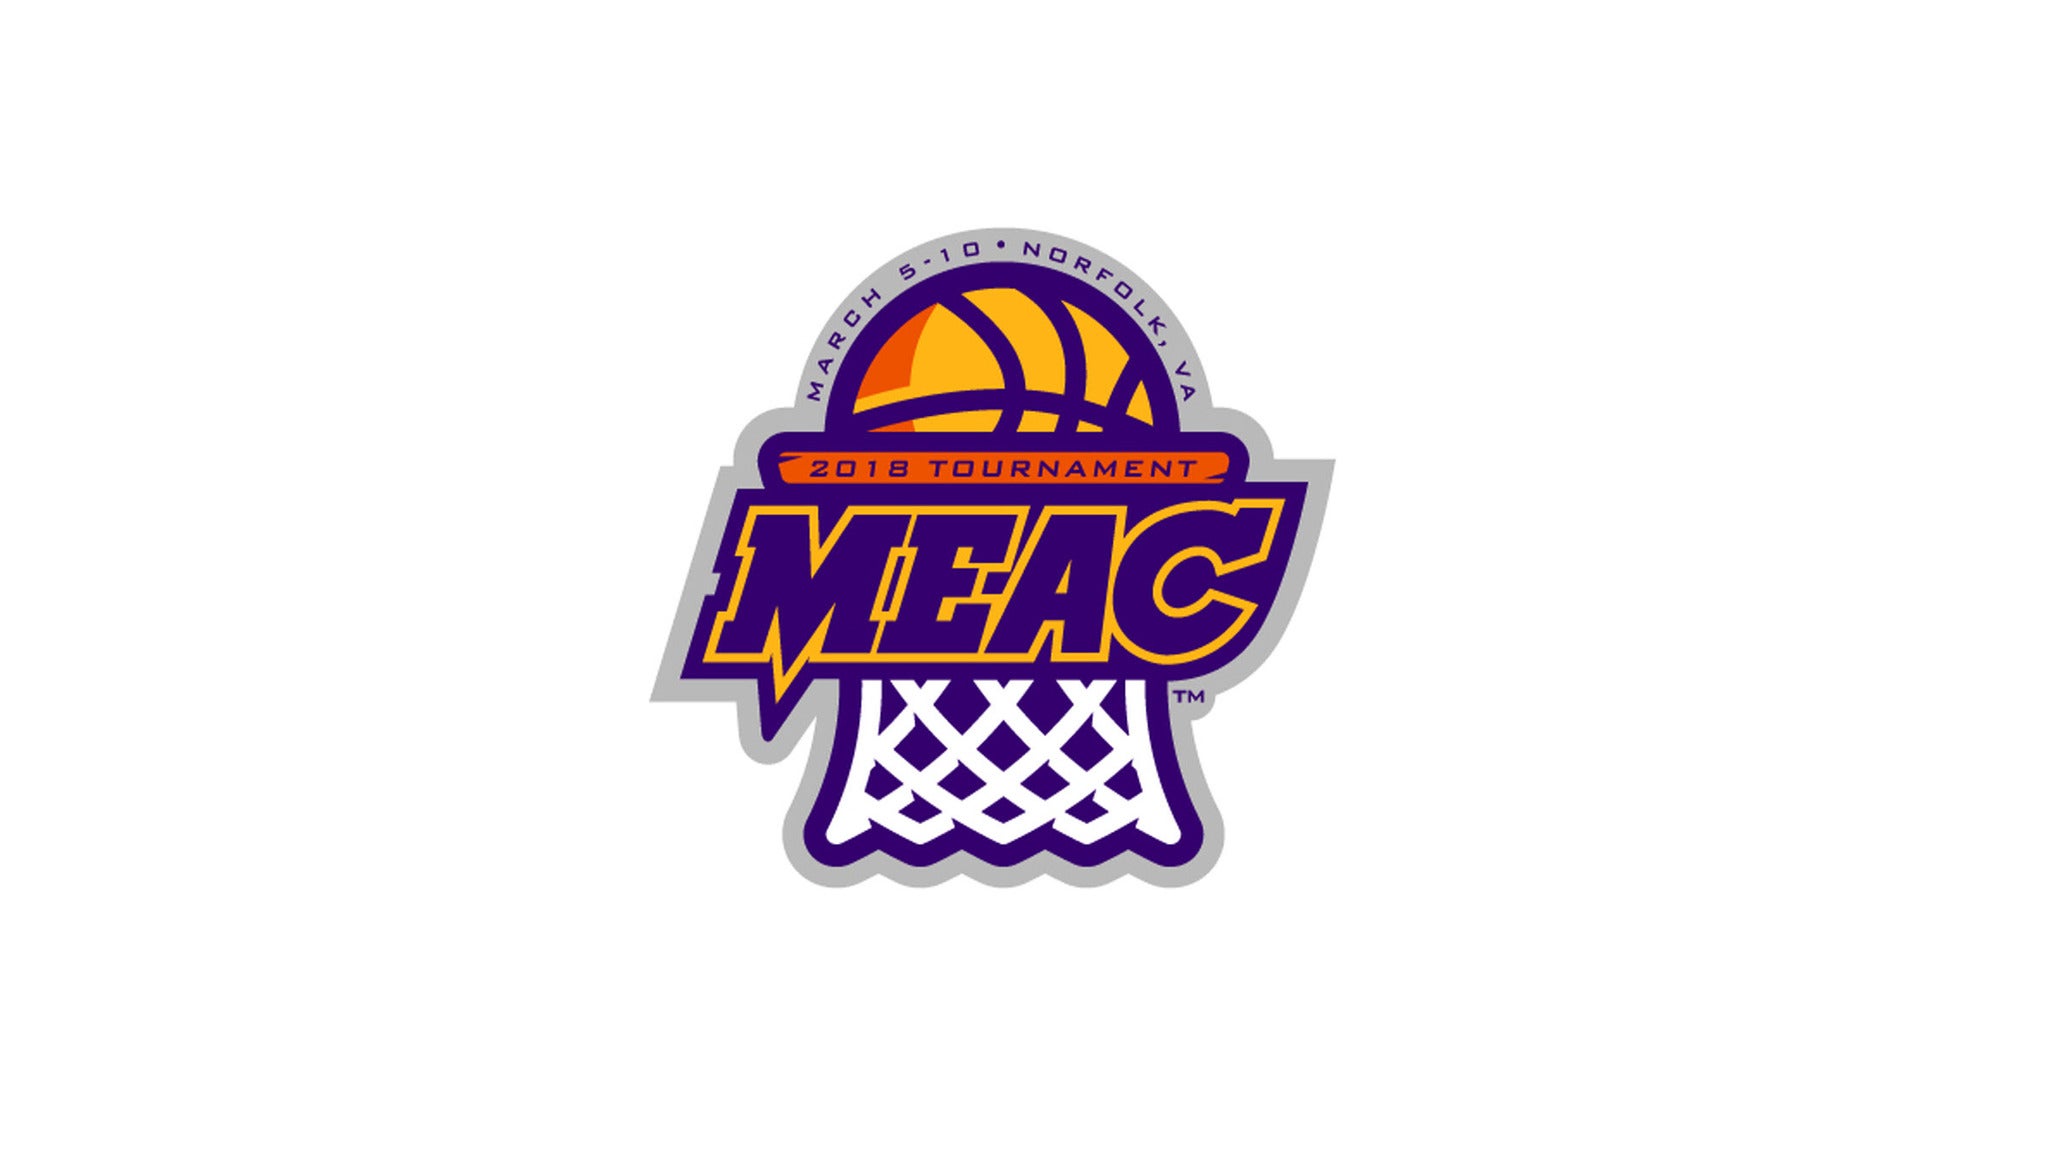 2023 Meac Mens & Women Basketball Tournament at Scope Arena